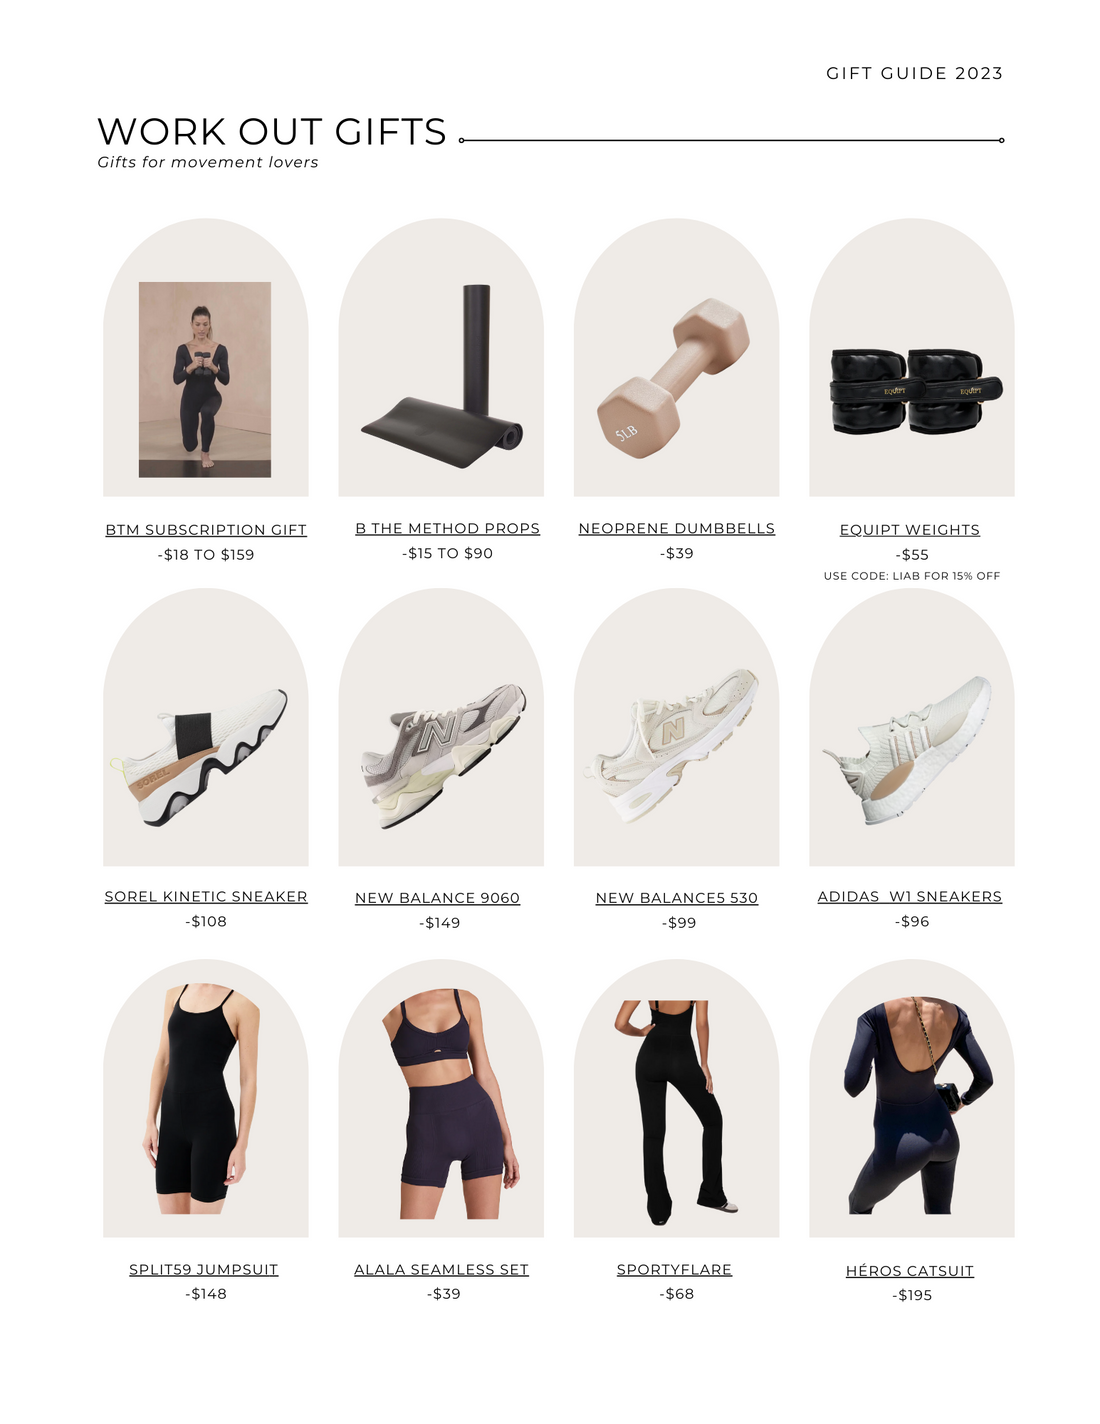 2023 Gift Guide: WORKOUT